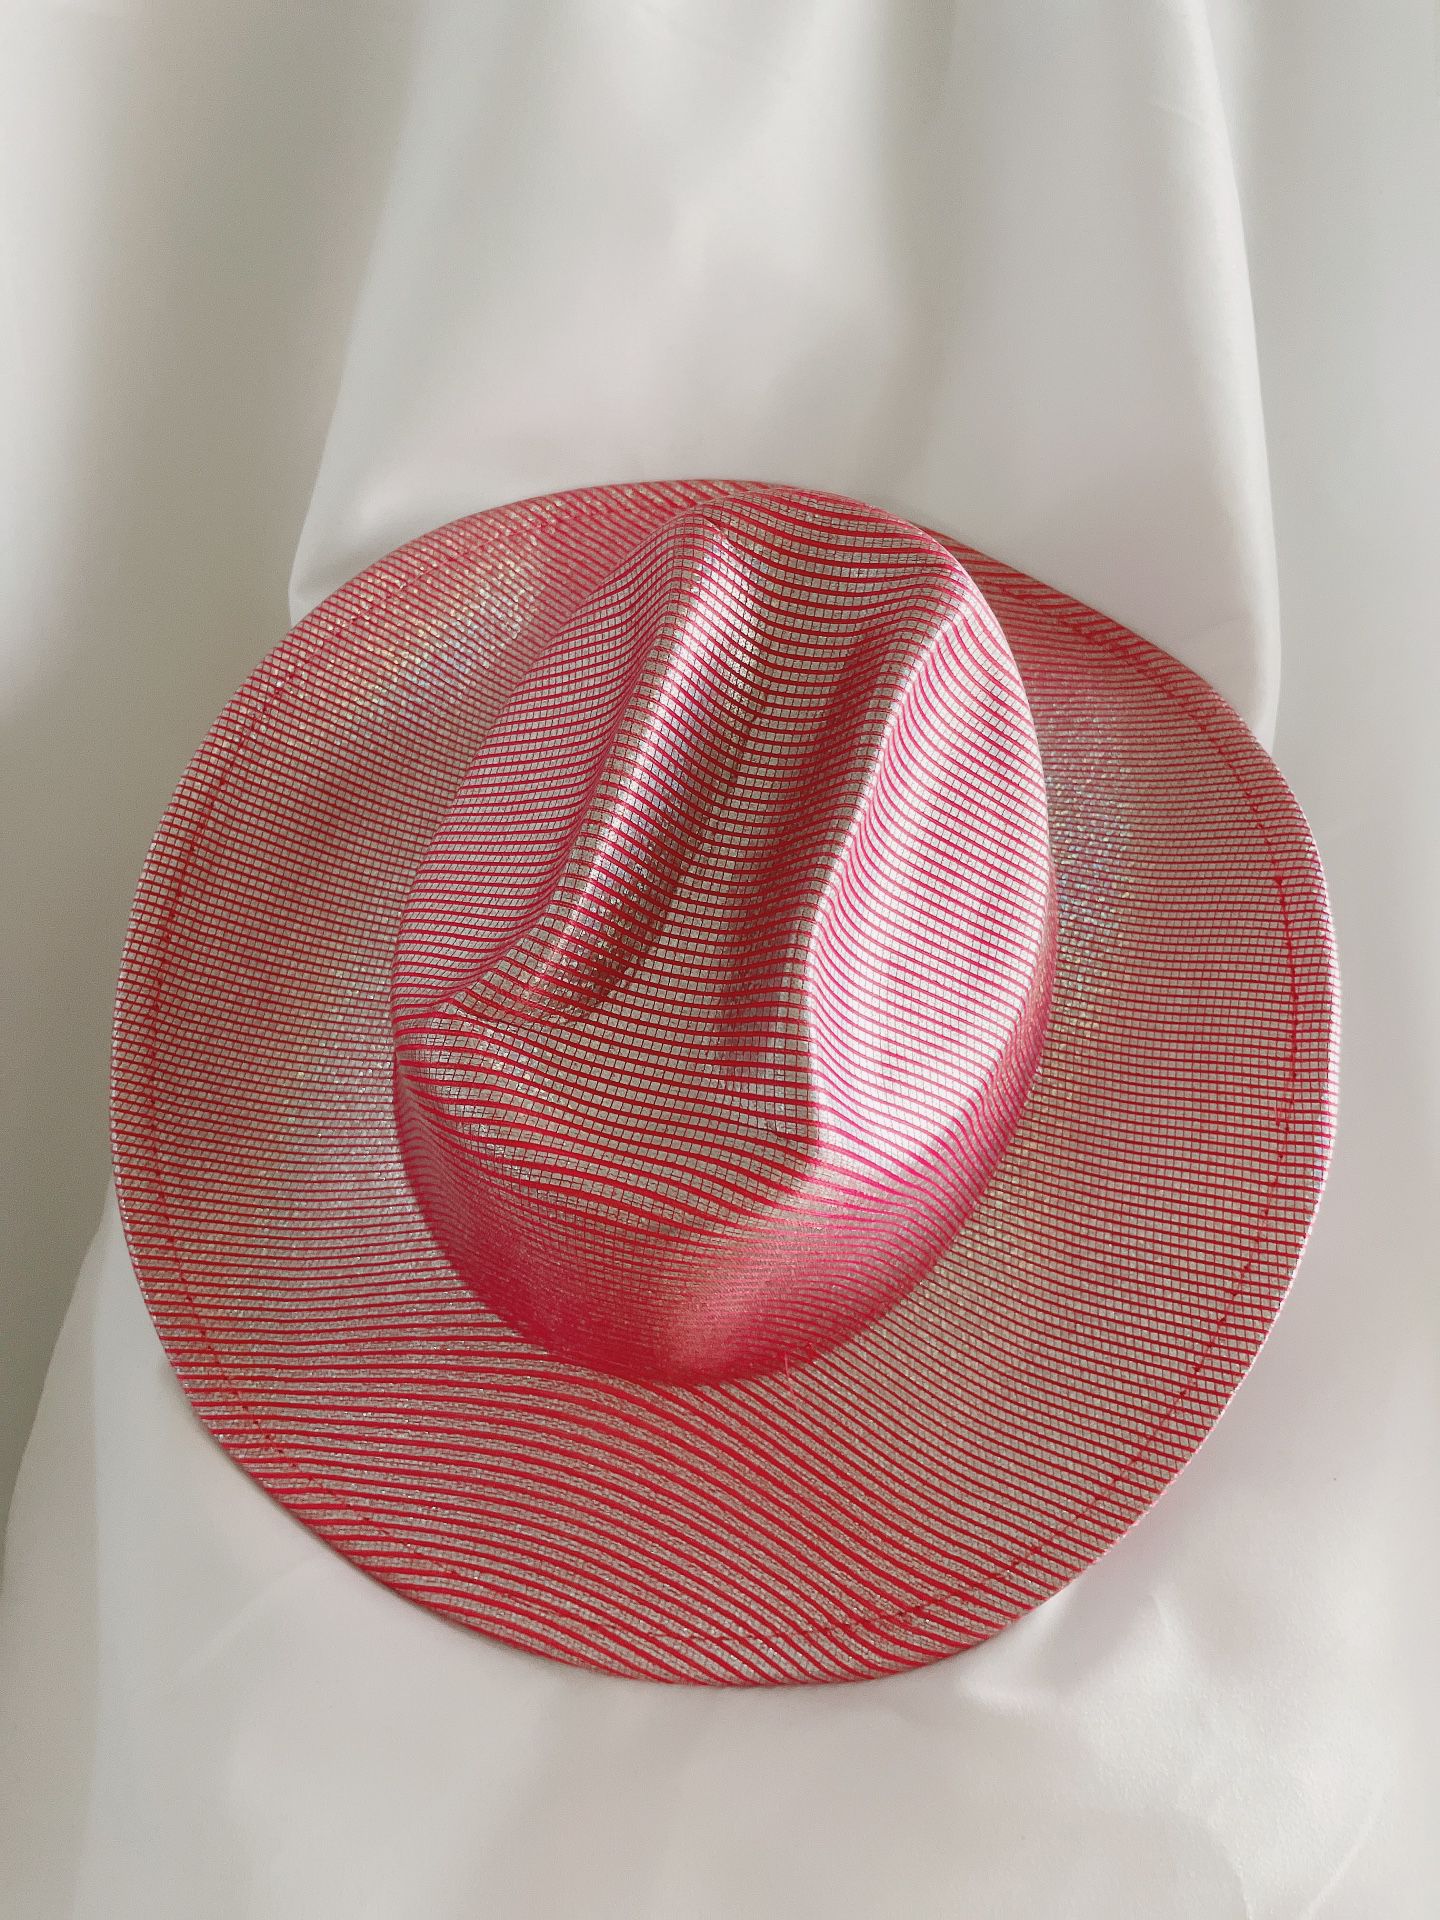 Western cowboy hat with Barbie pink bling bling band